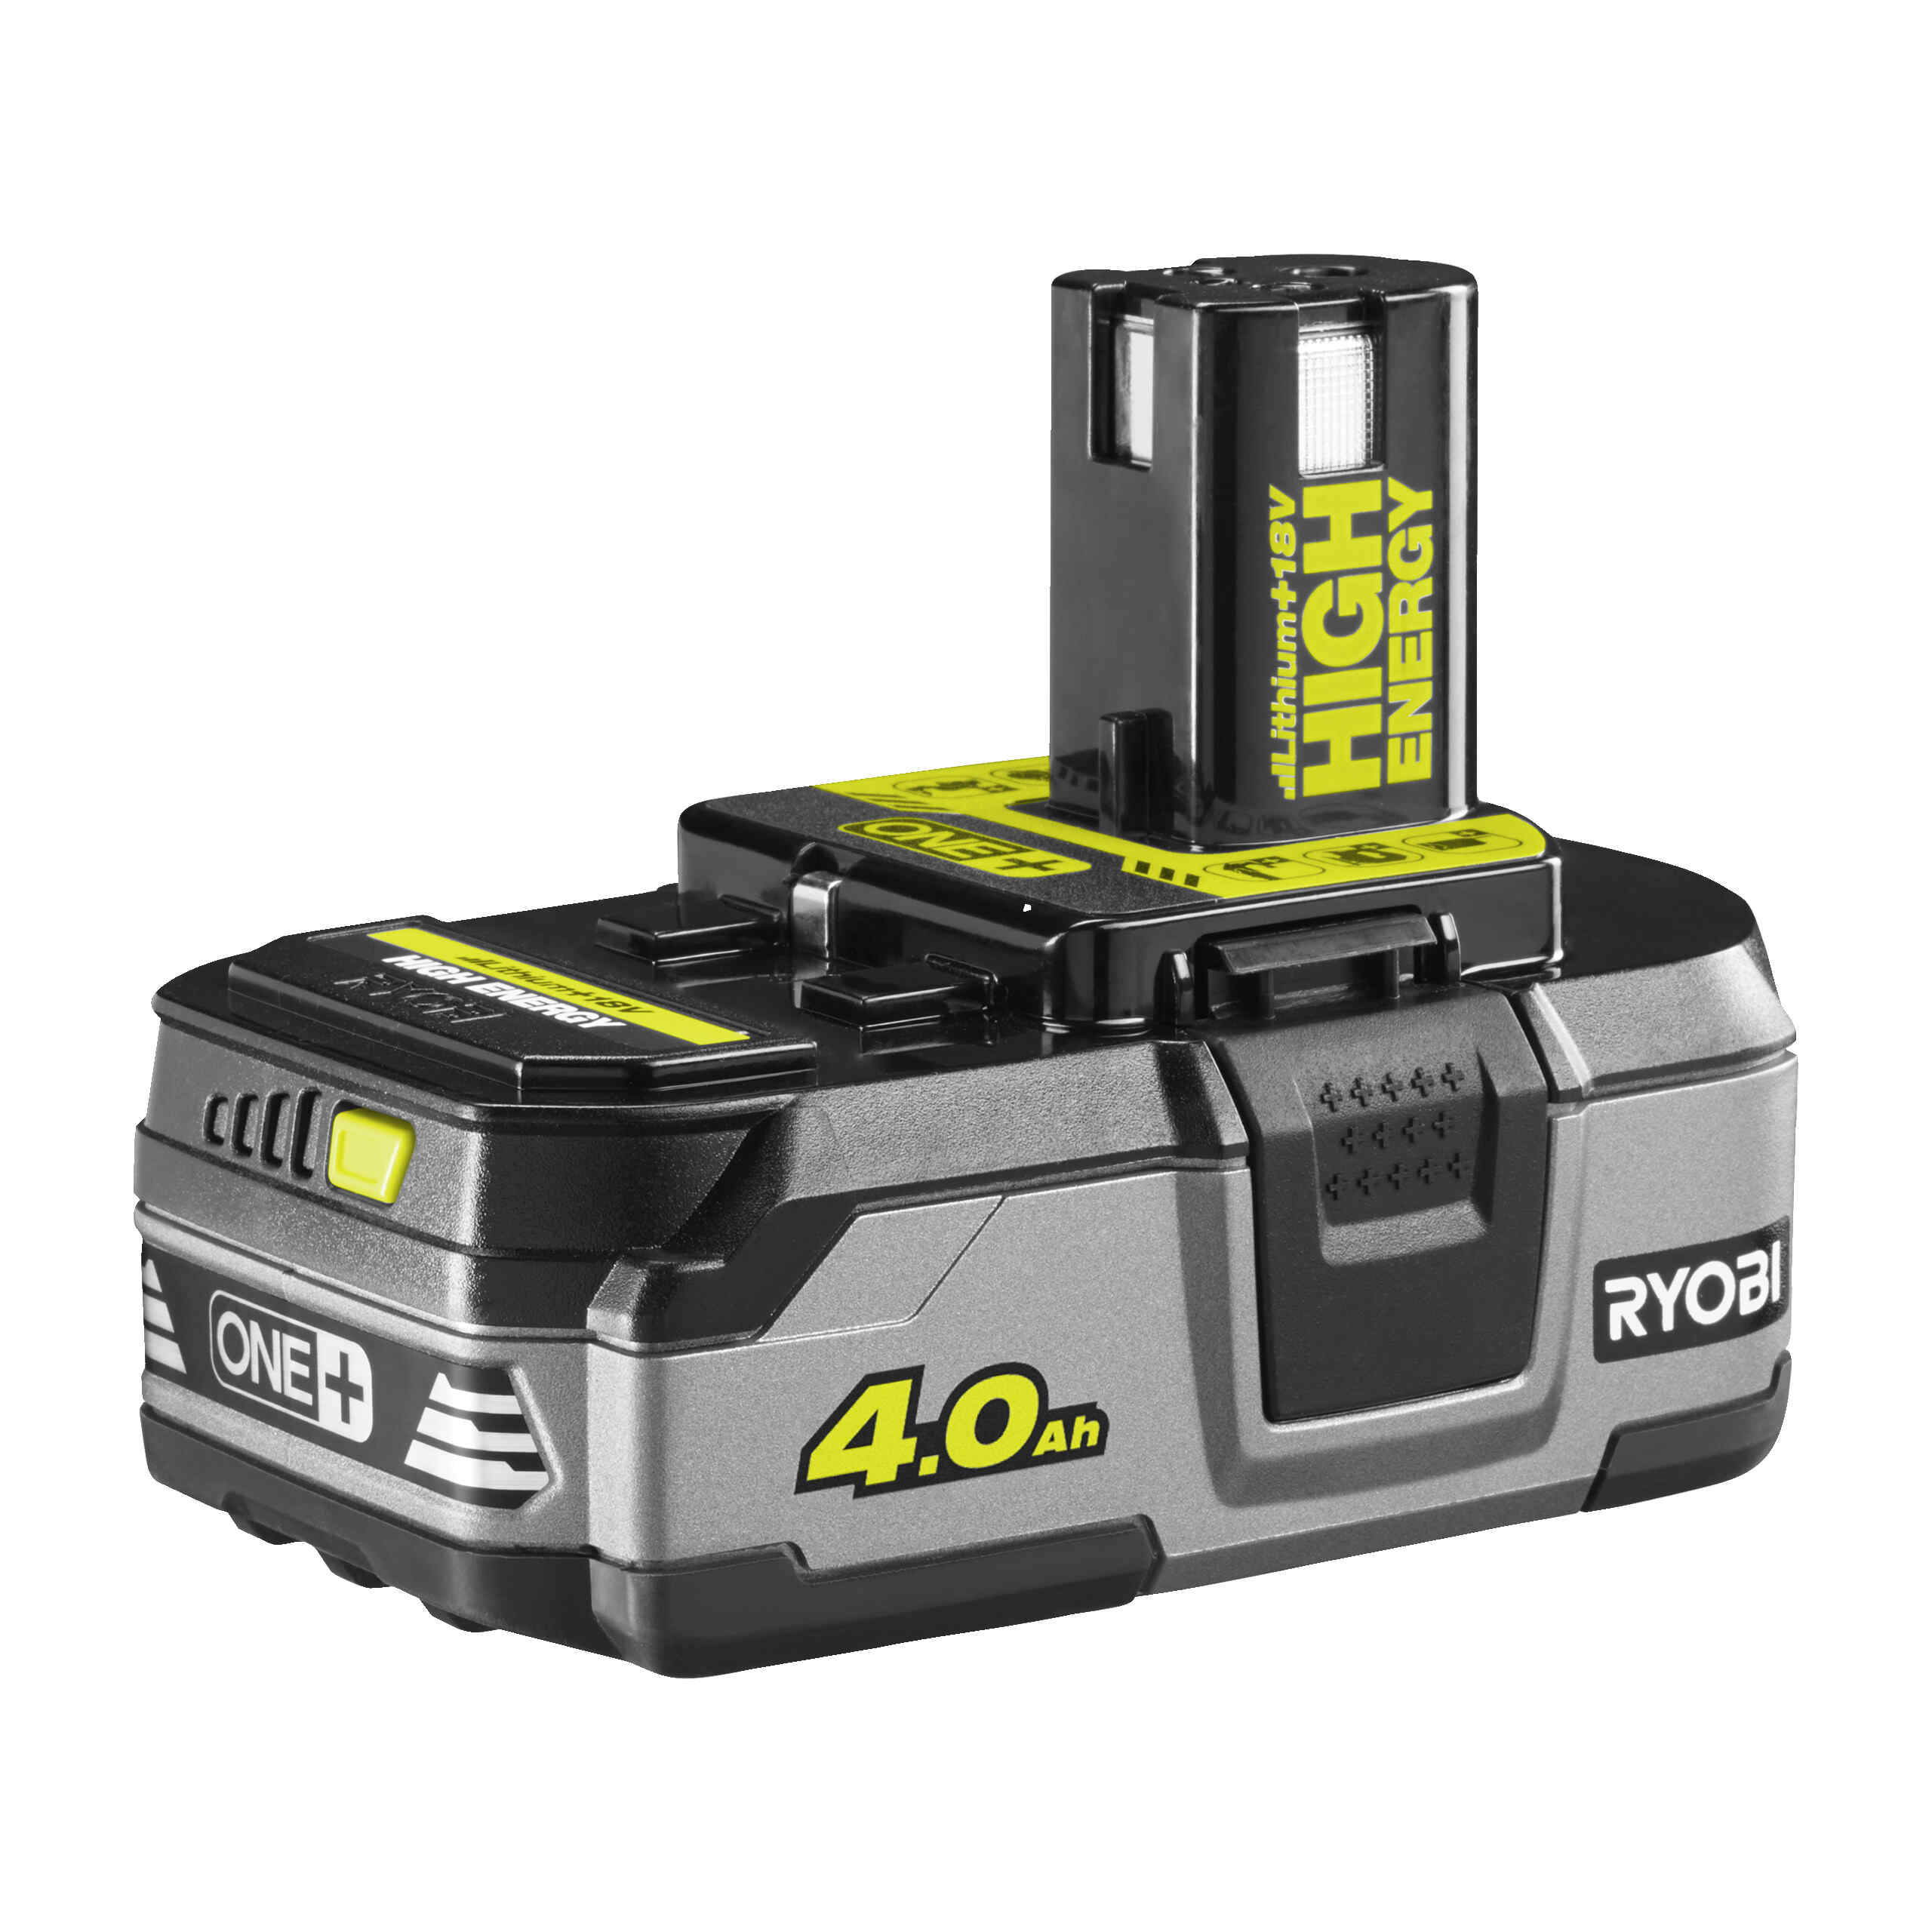 How Long Does It Take For A Ryobi 18V Battery To Charge